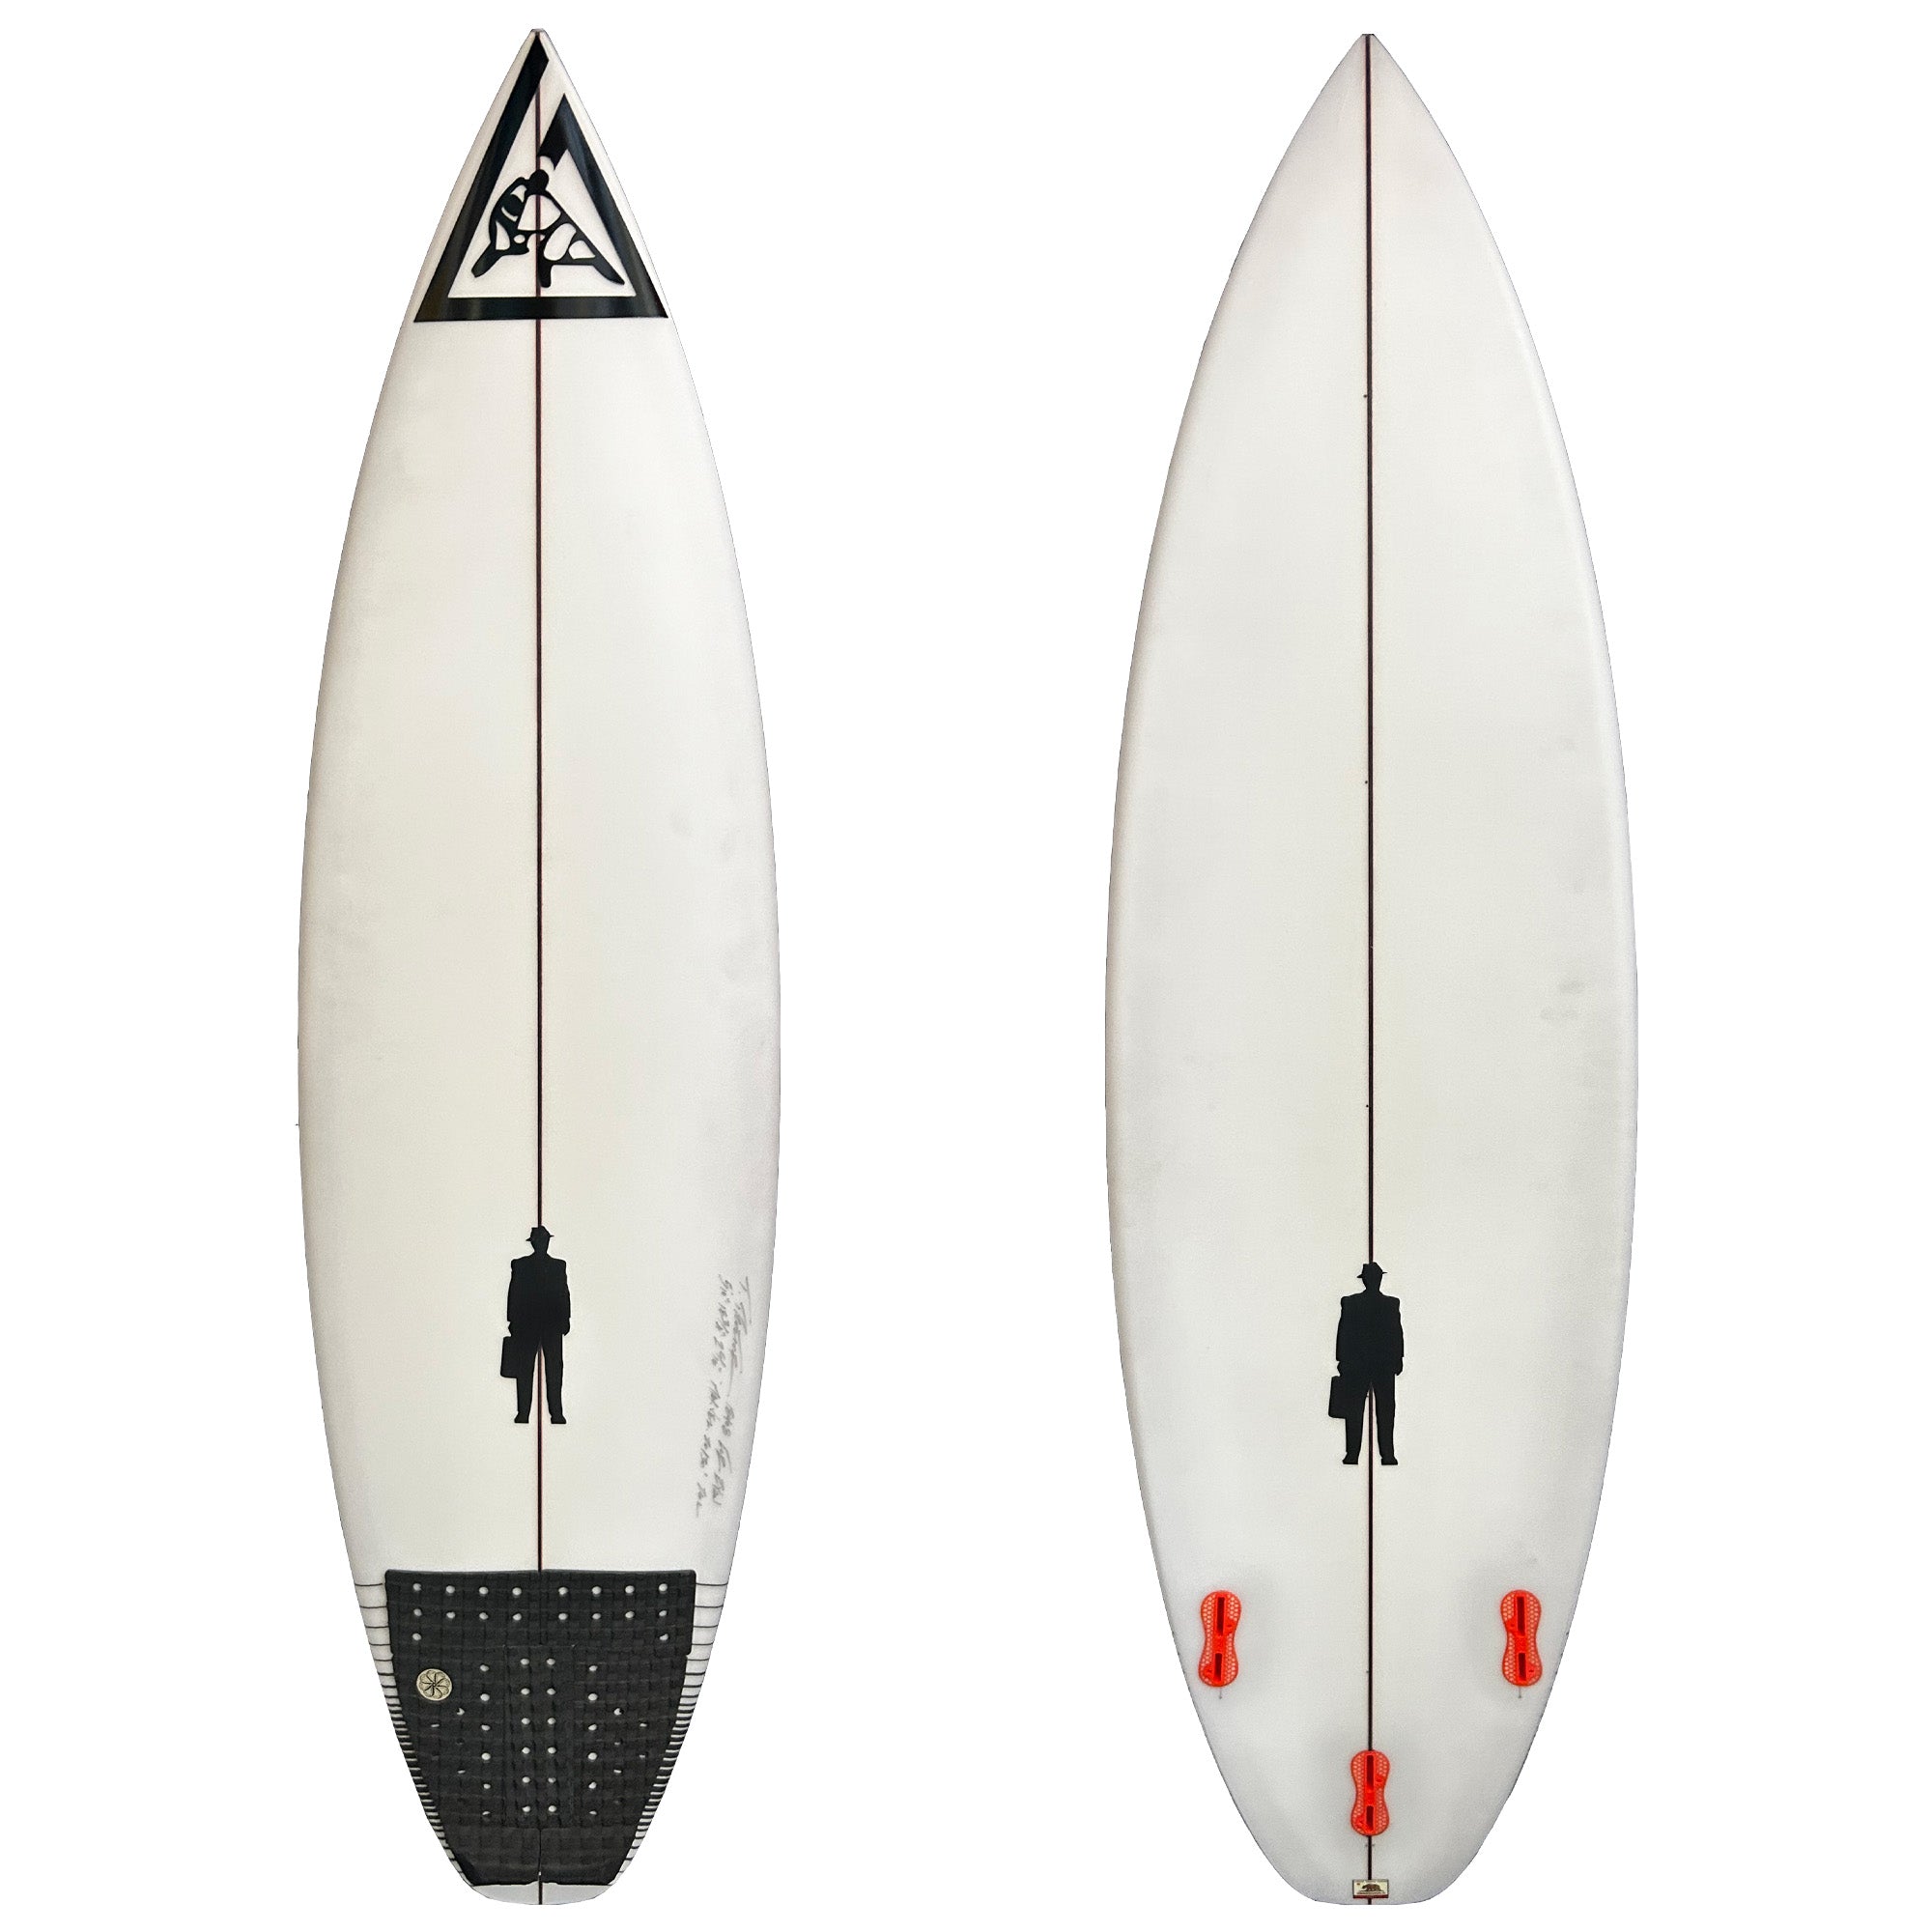 Proctor 5'10 Consignment Surfboard